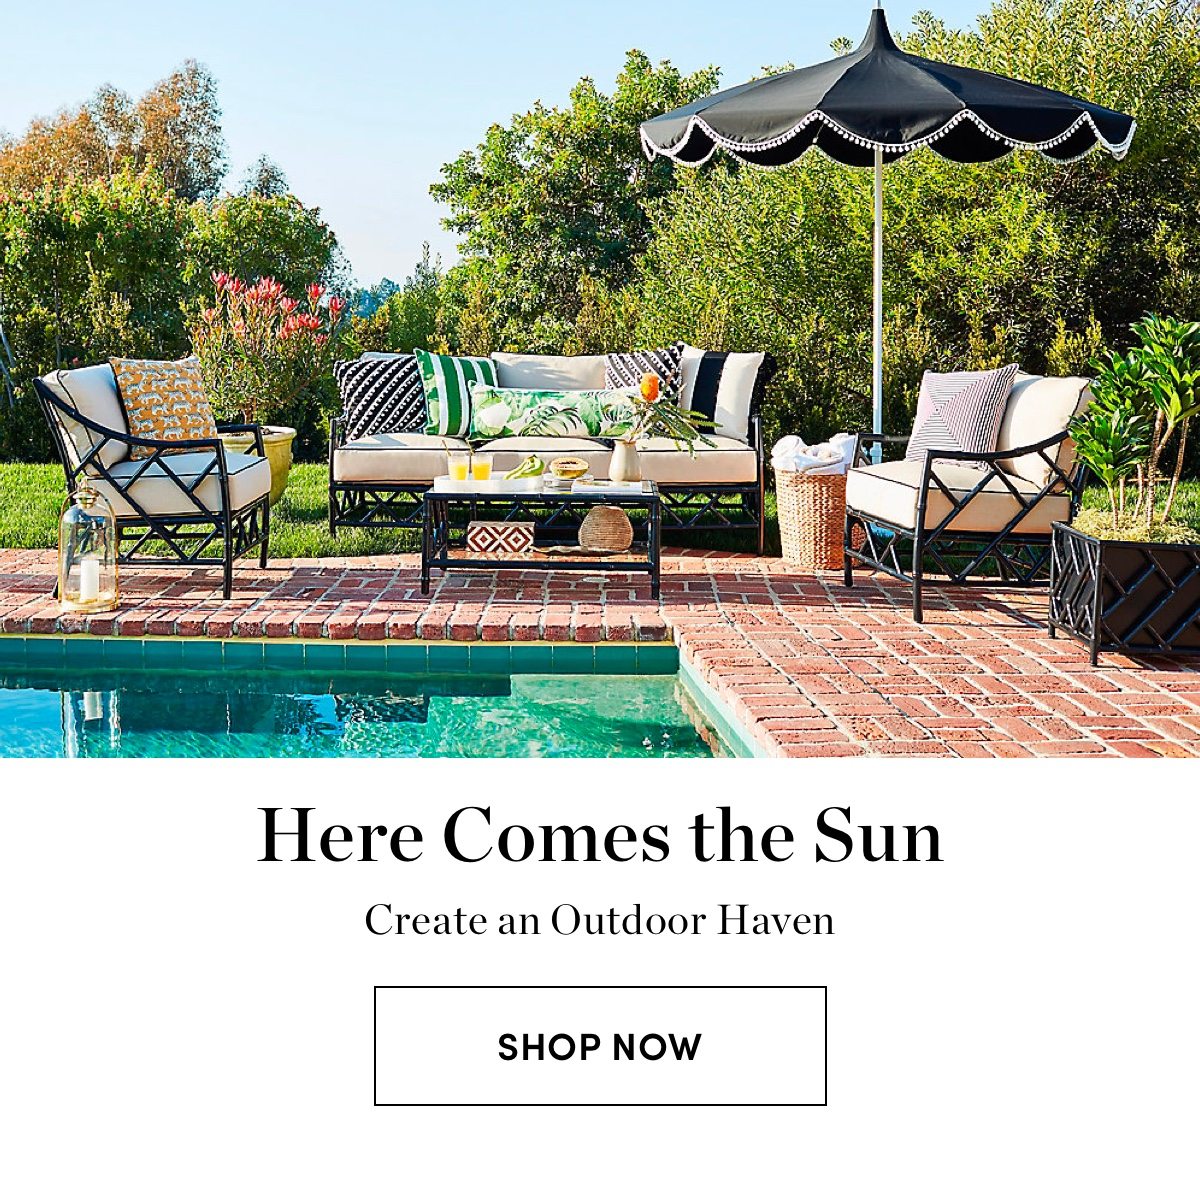 Create an Outdoor Haven